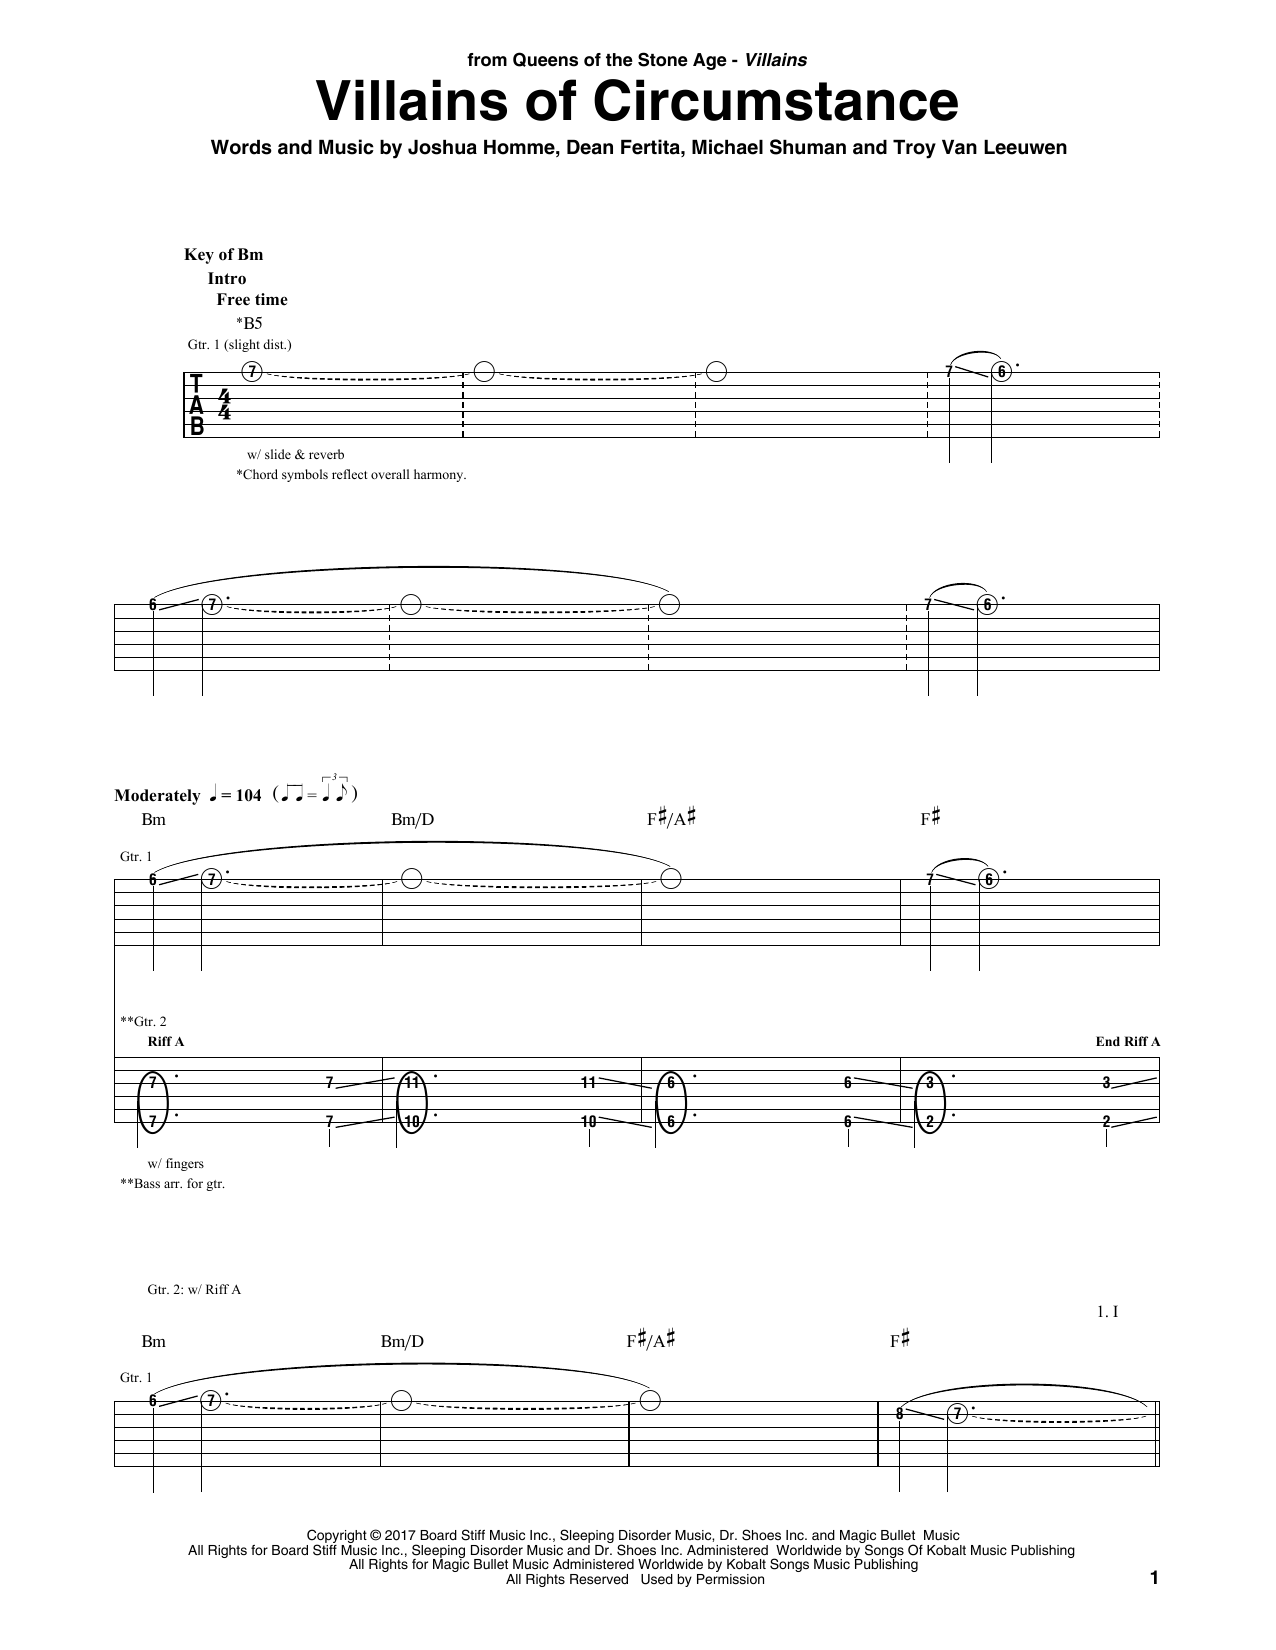 Download Queens Of The Stone Age Villains Of Circumstance Sheet Music